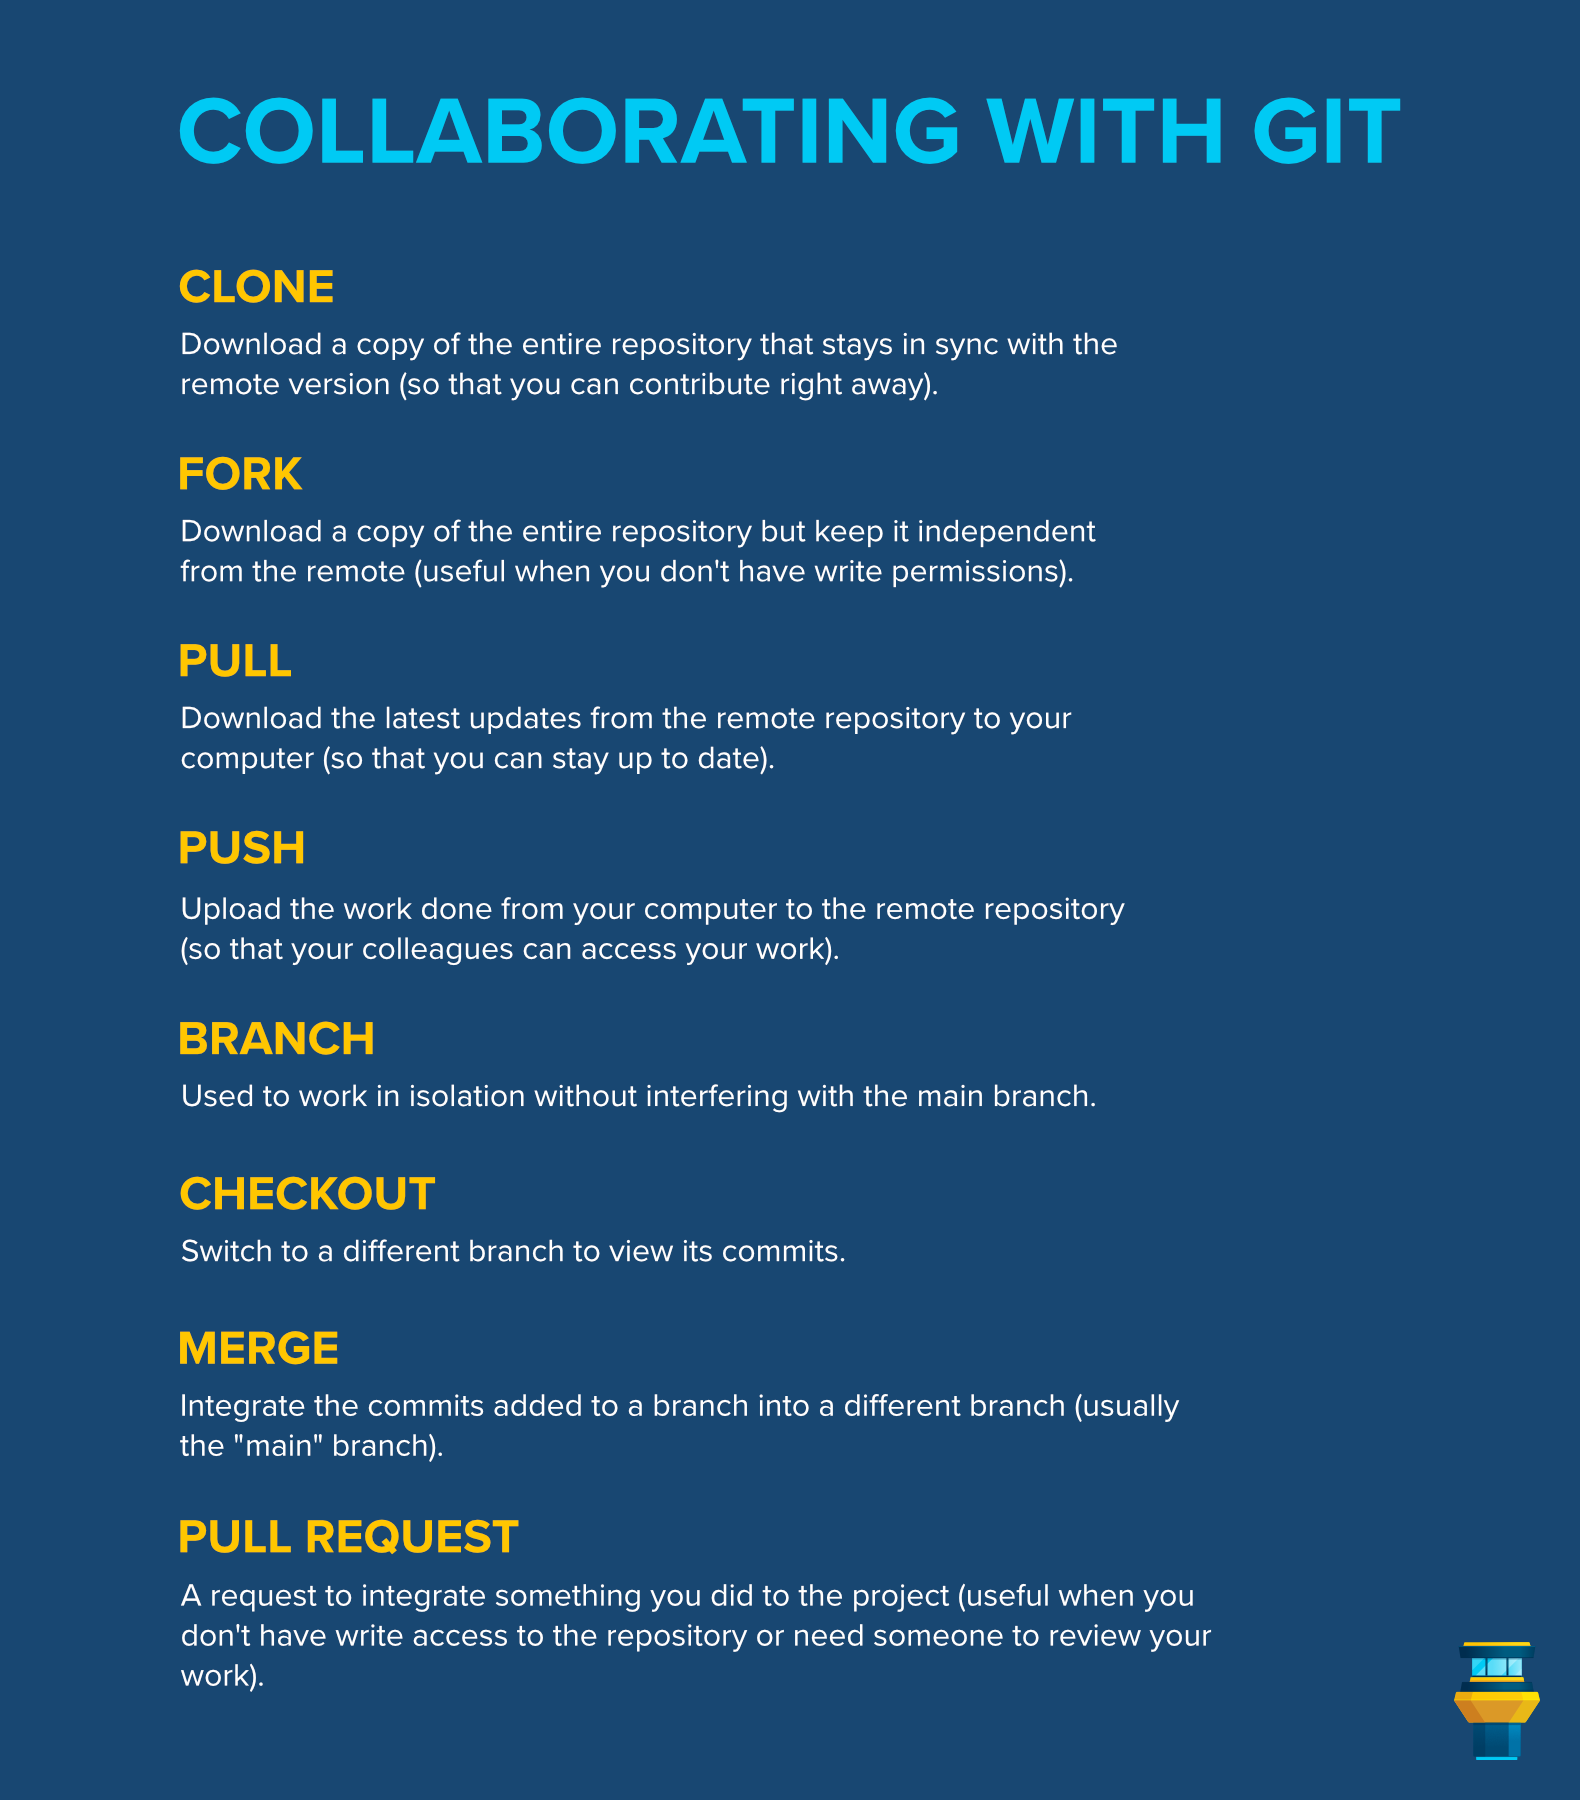 Collaborating with Git cheat sheet